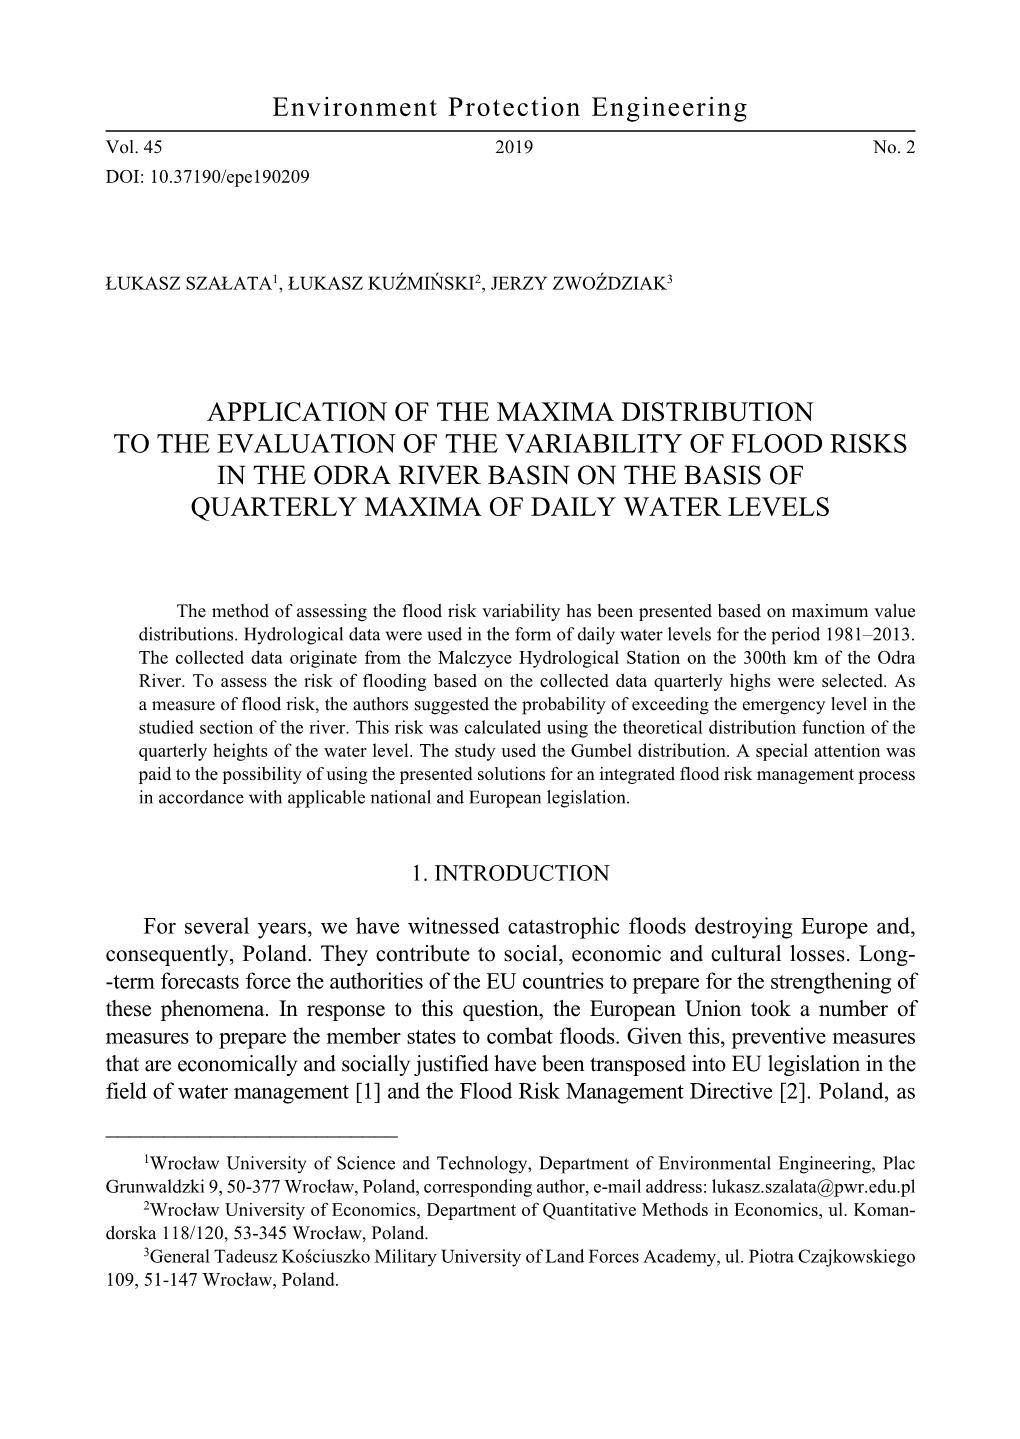 Application of the Maxima Distribution to the Evaluation of the Variability of Flood Risks In